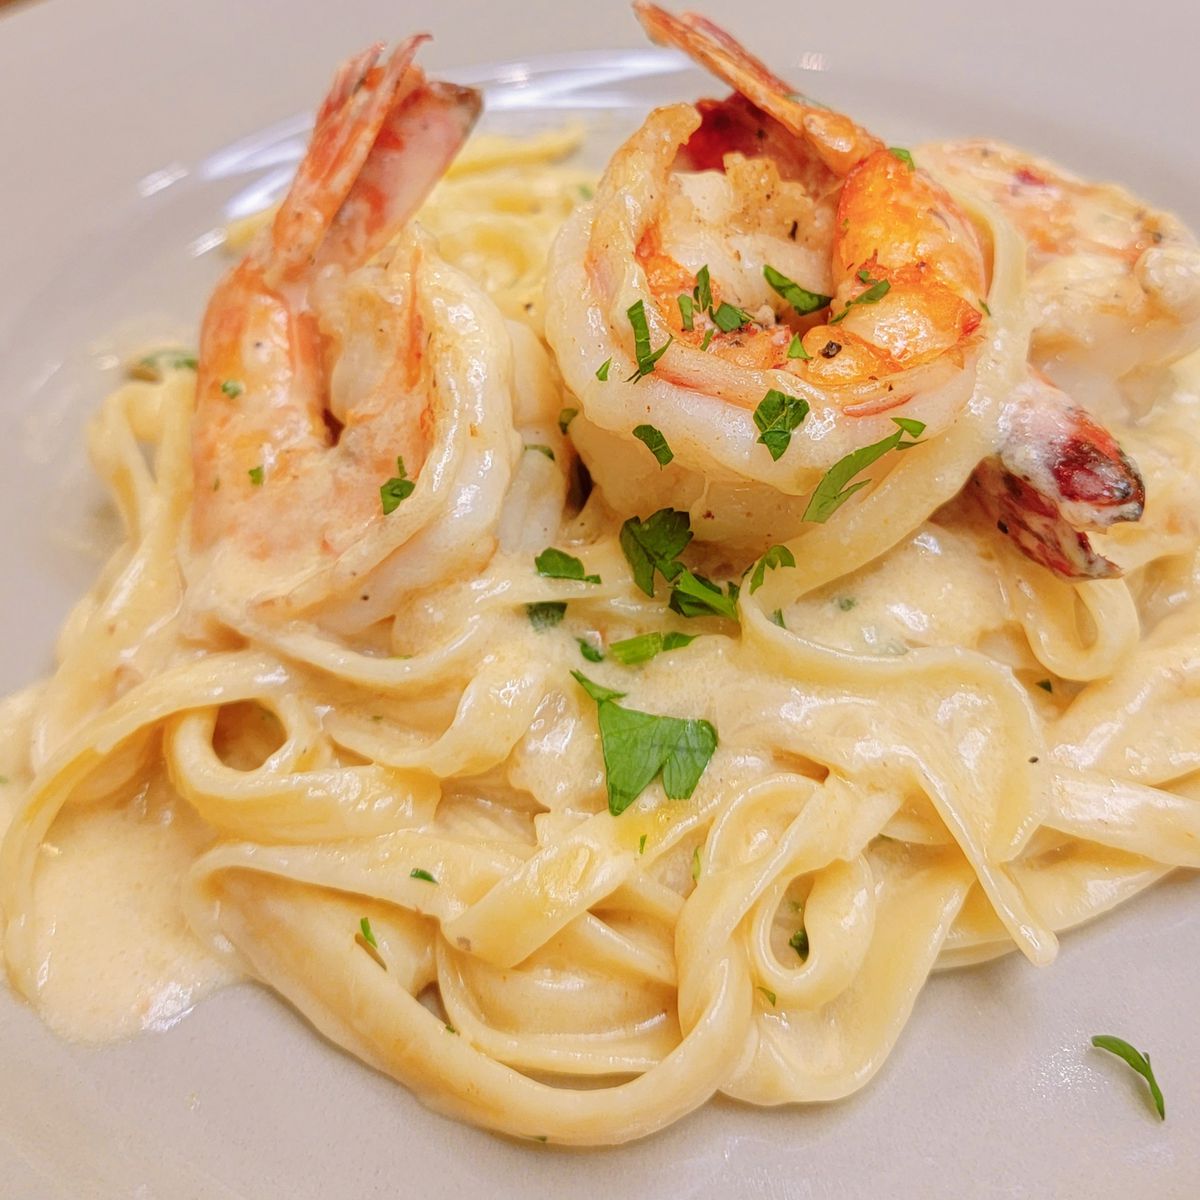 Prawns on noodles and cream.